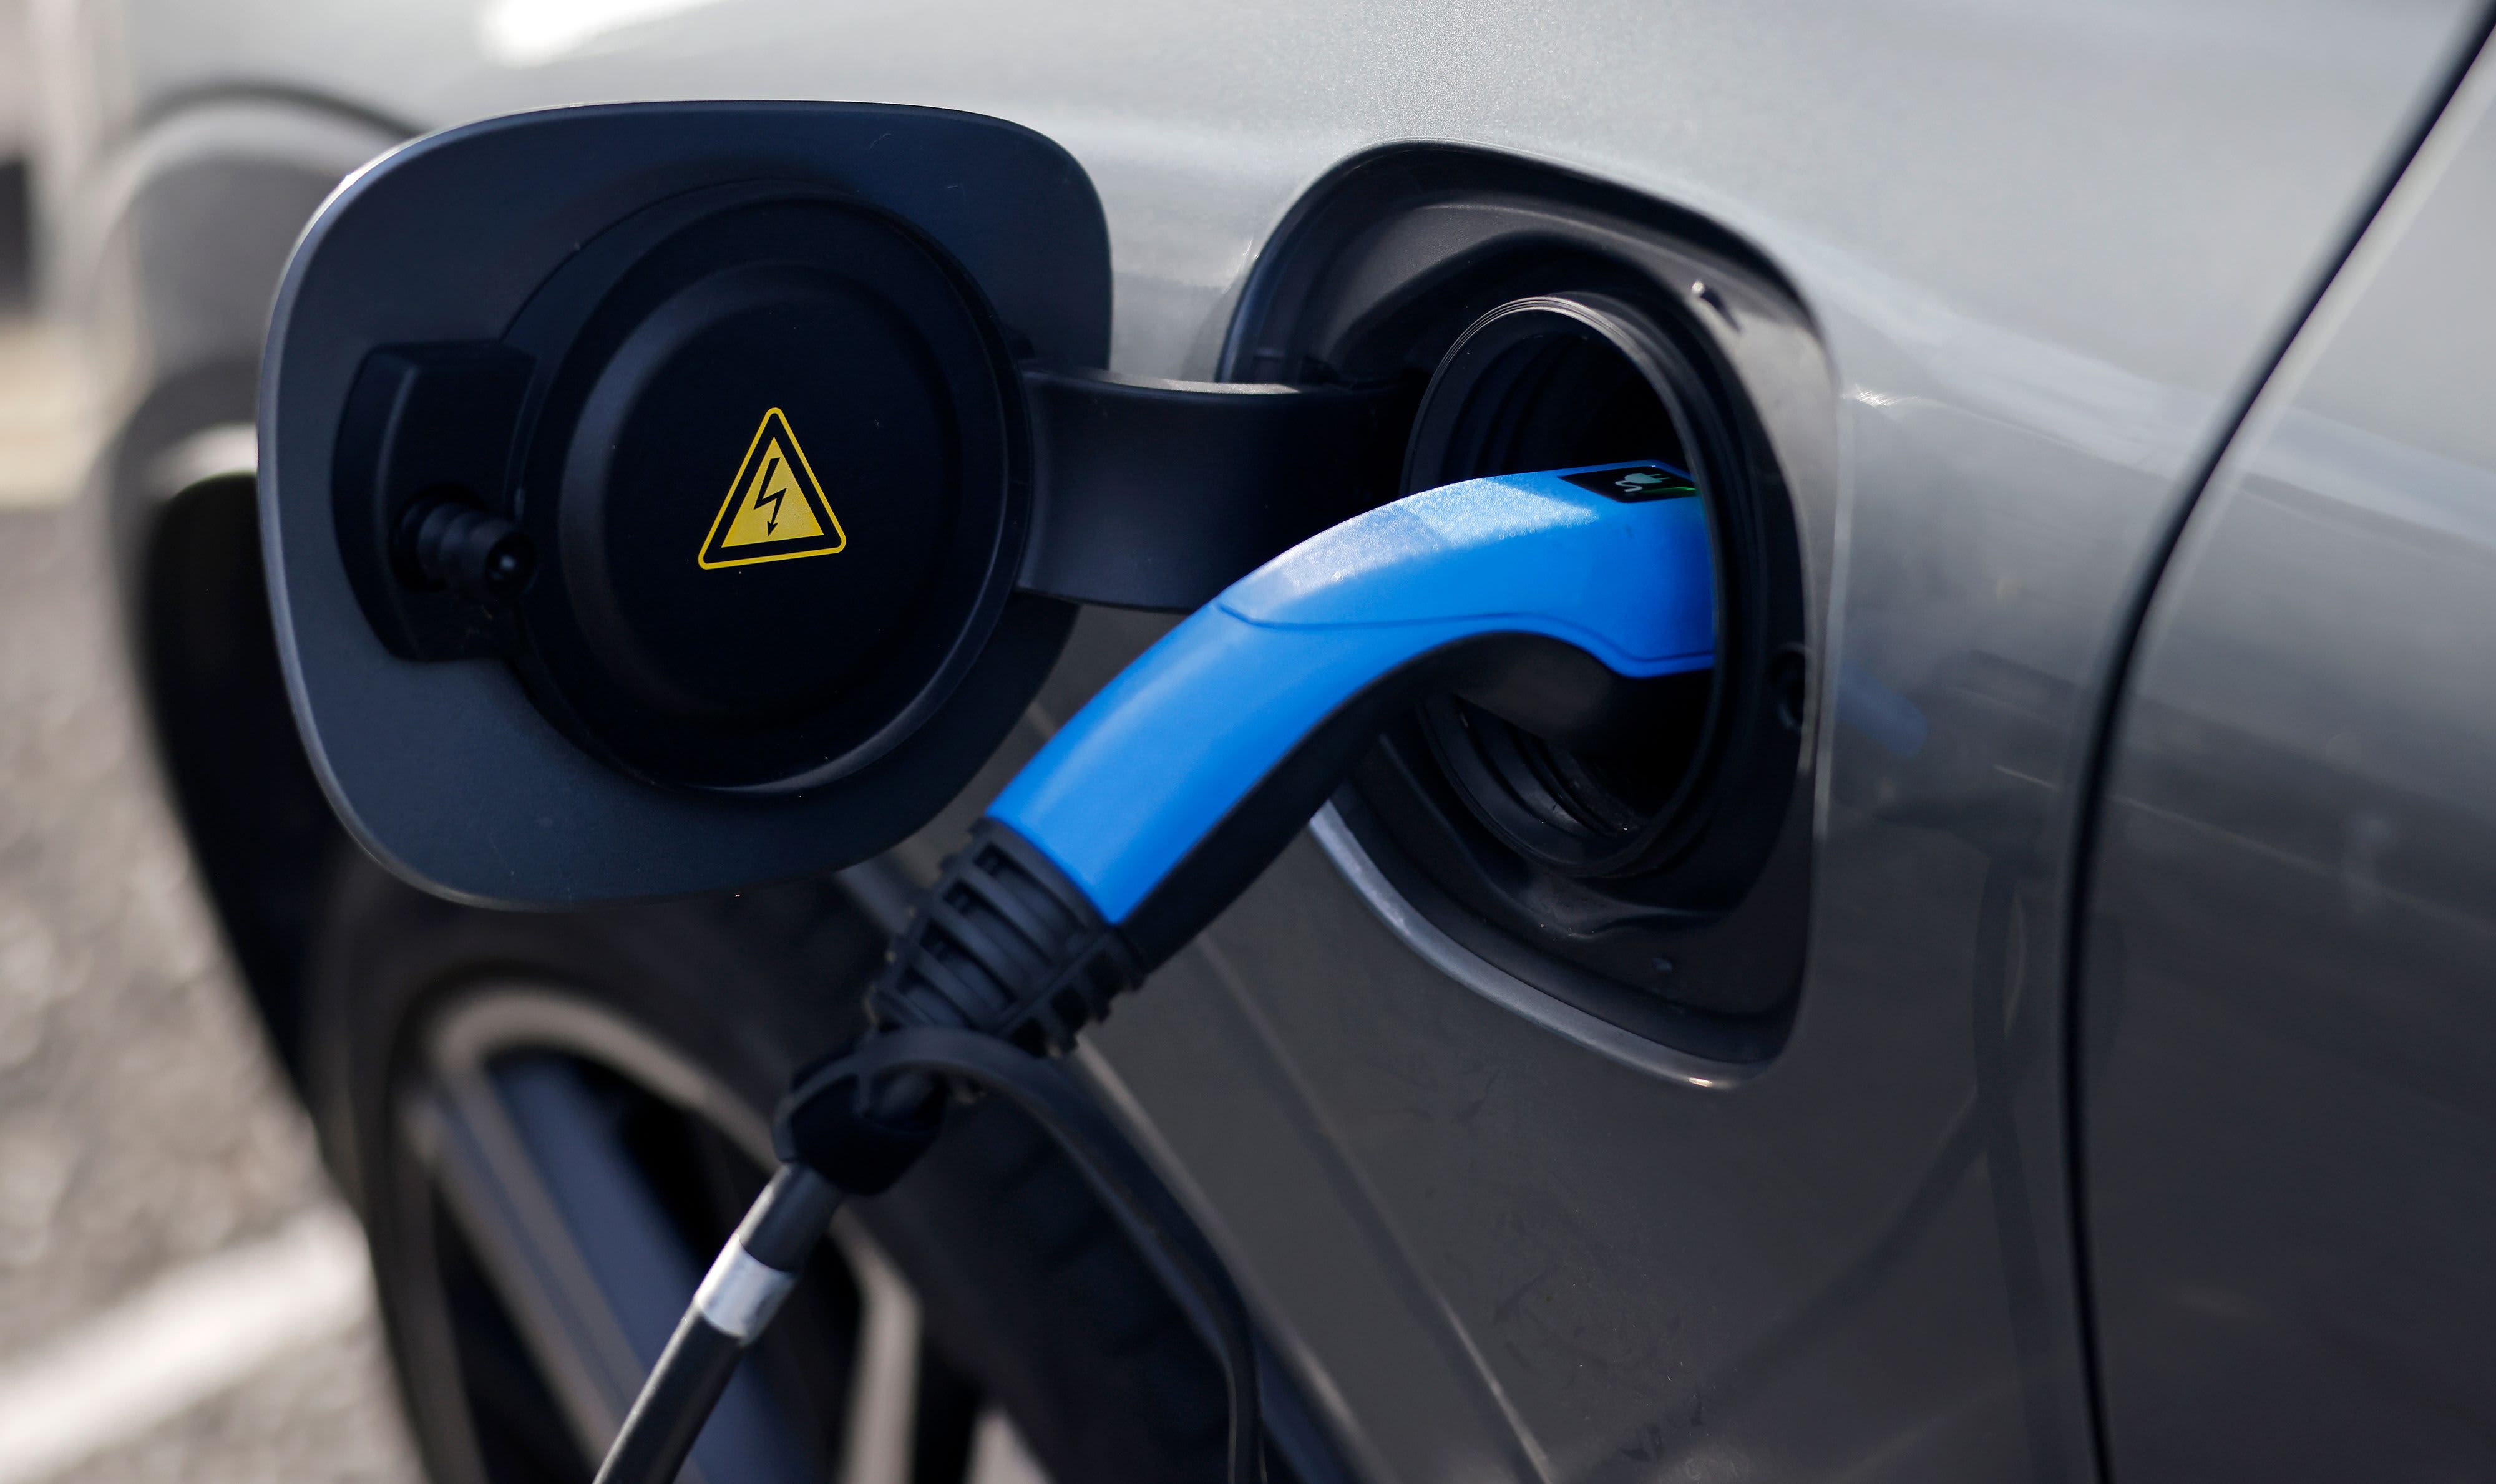 New homes in England must have electric vehicle charging points